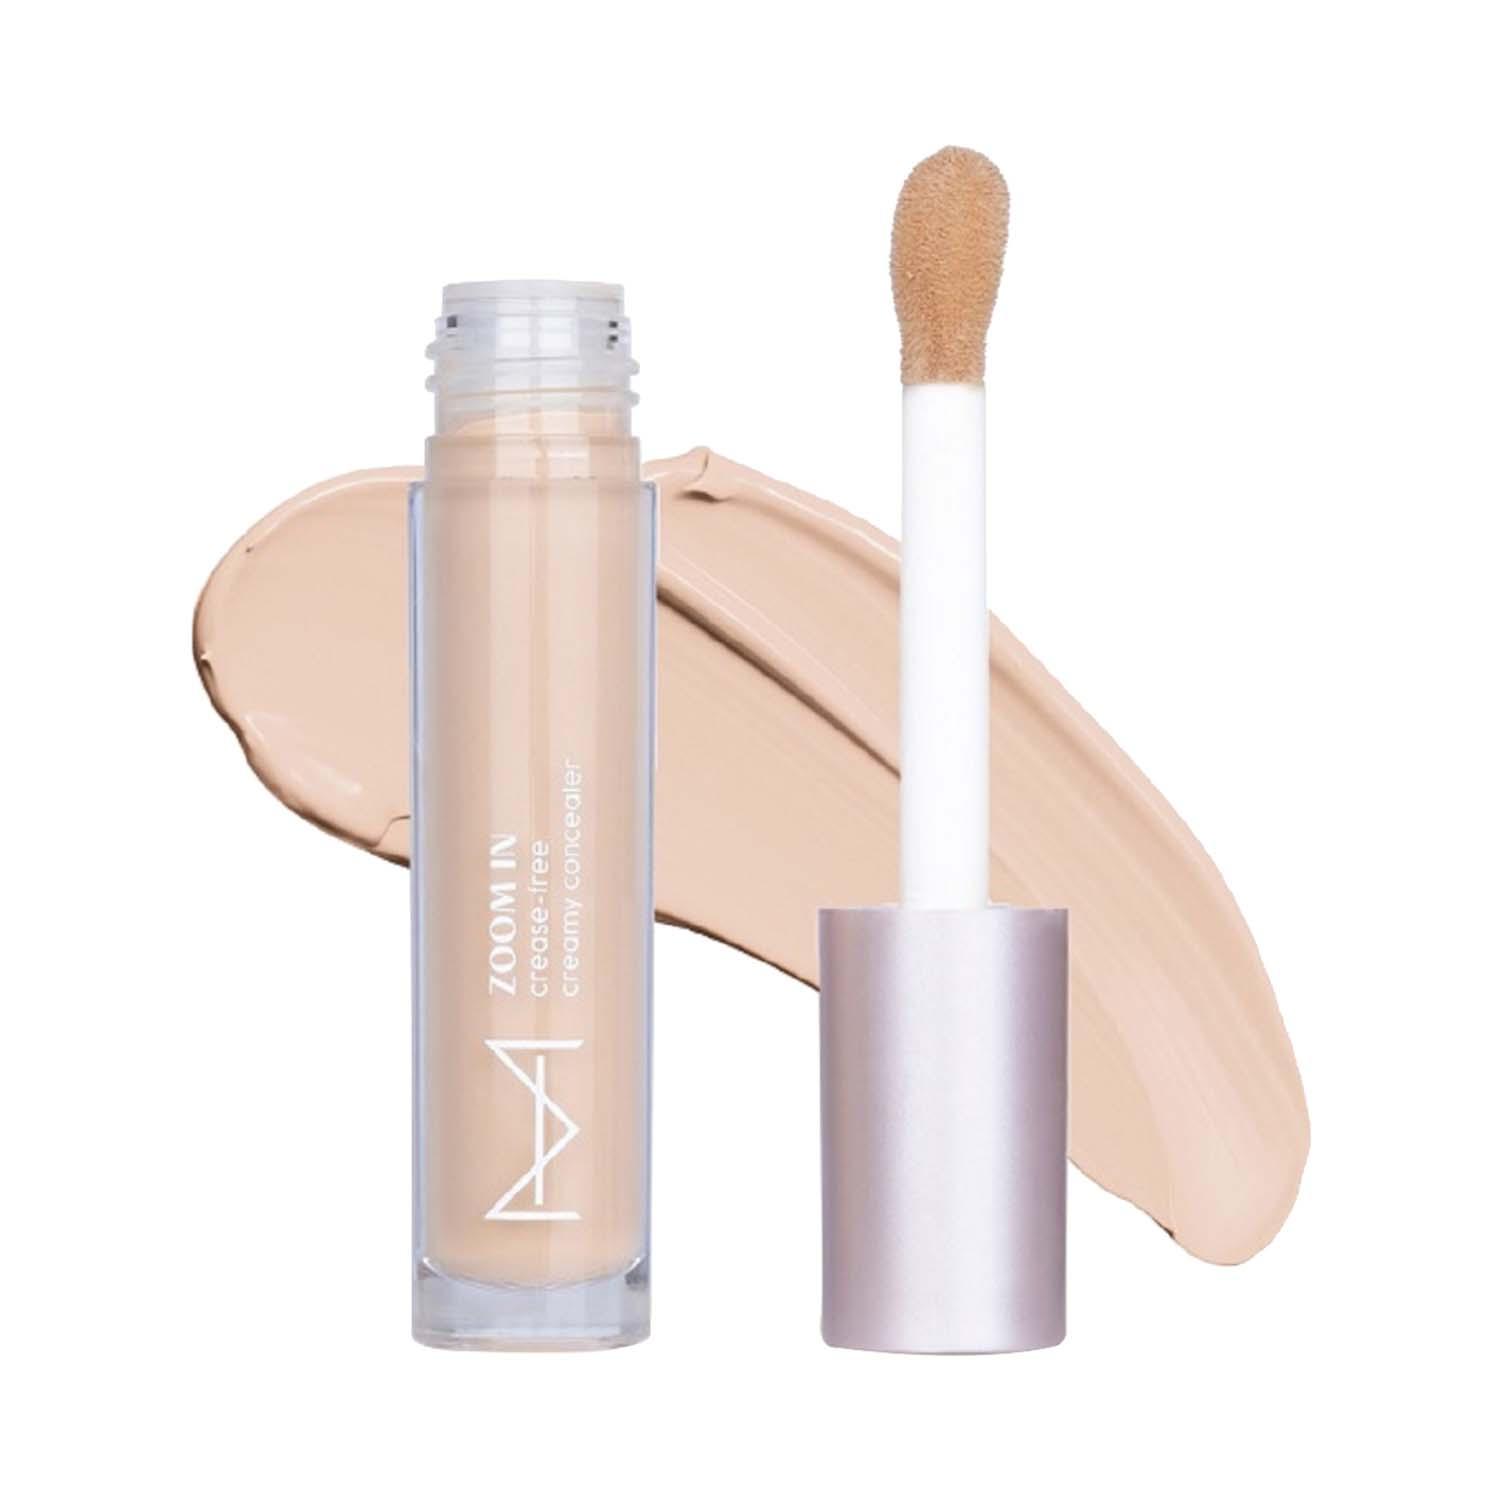 HOUSE OF MAKEUP | HOUSE OF MAKEUP Zoom In Crease-Free, Creamy Concealer - LM01 Light To Medium Skin Tone (6 ml)